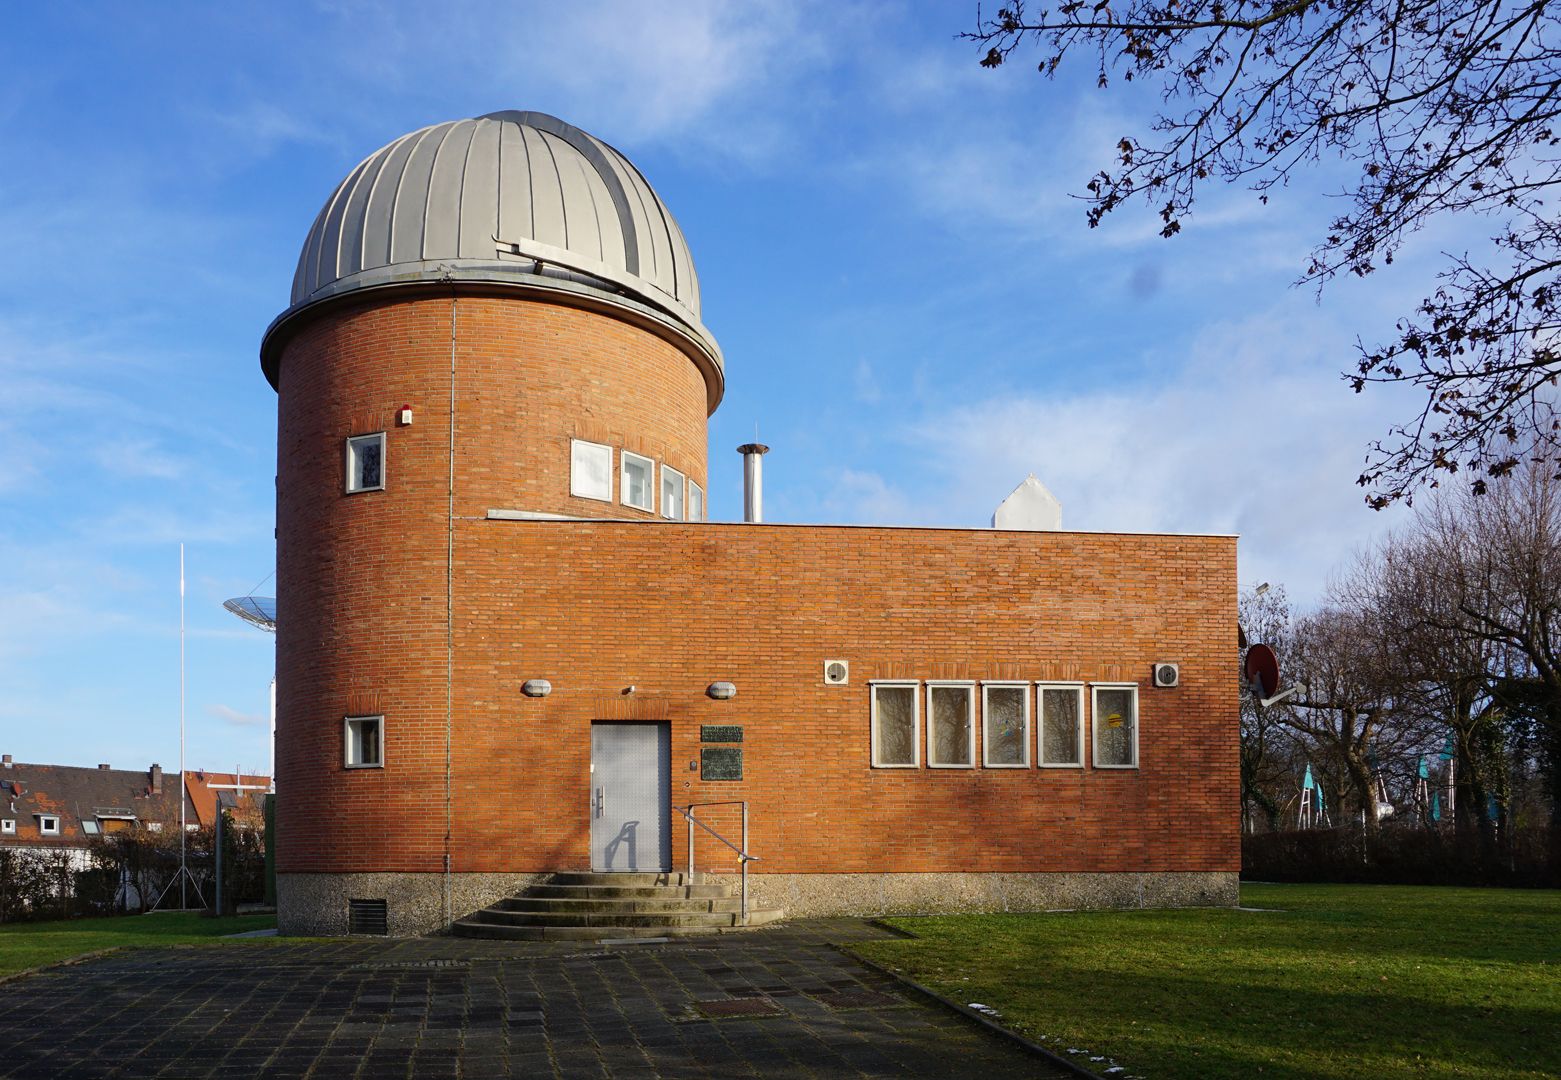 Public observatory on the Rechenberg View from the west